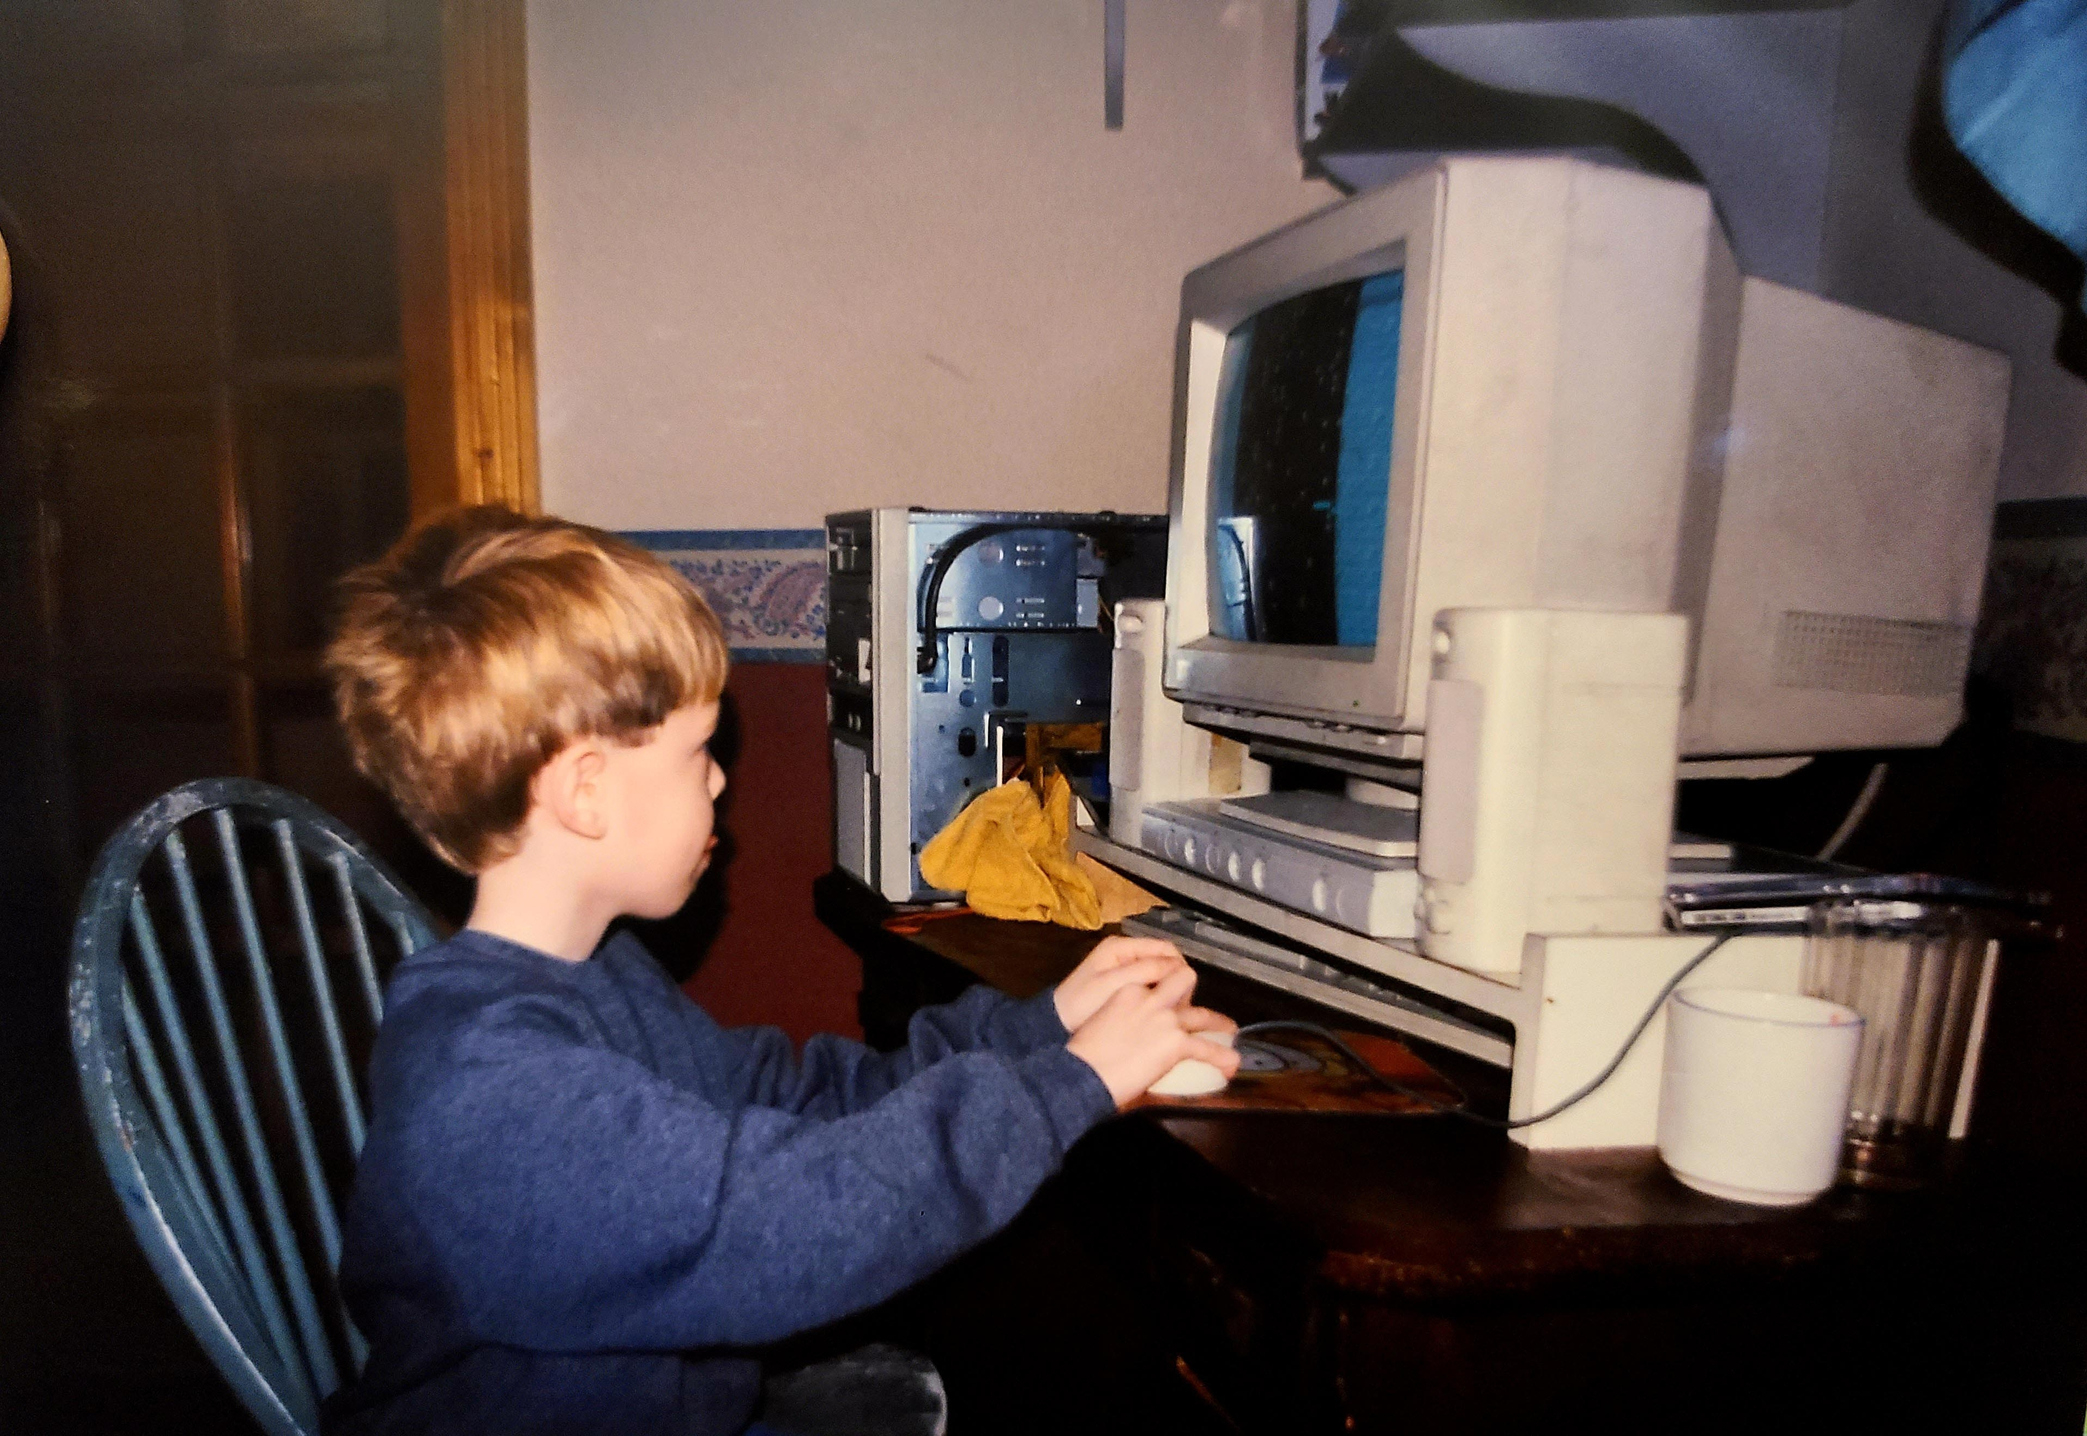 A child is sitting in front of an old computer